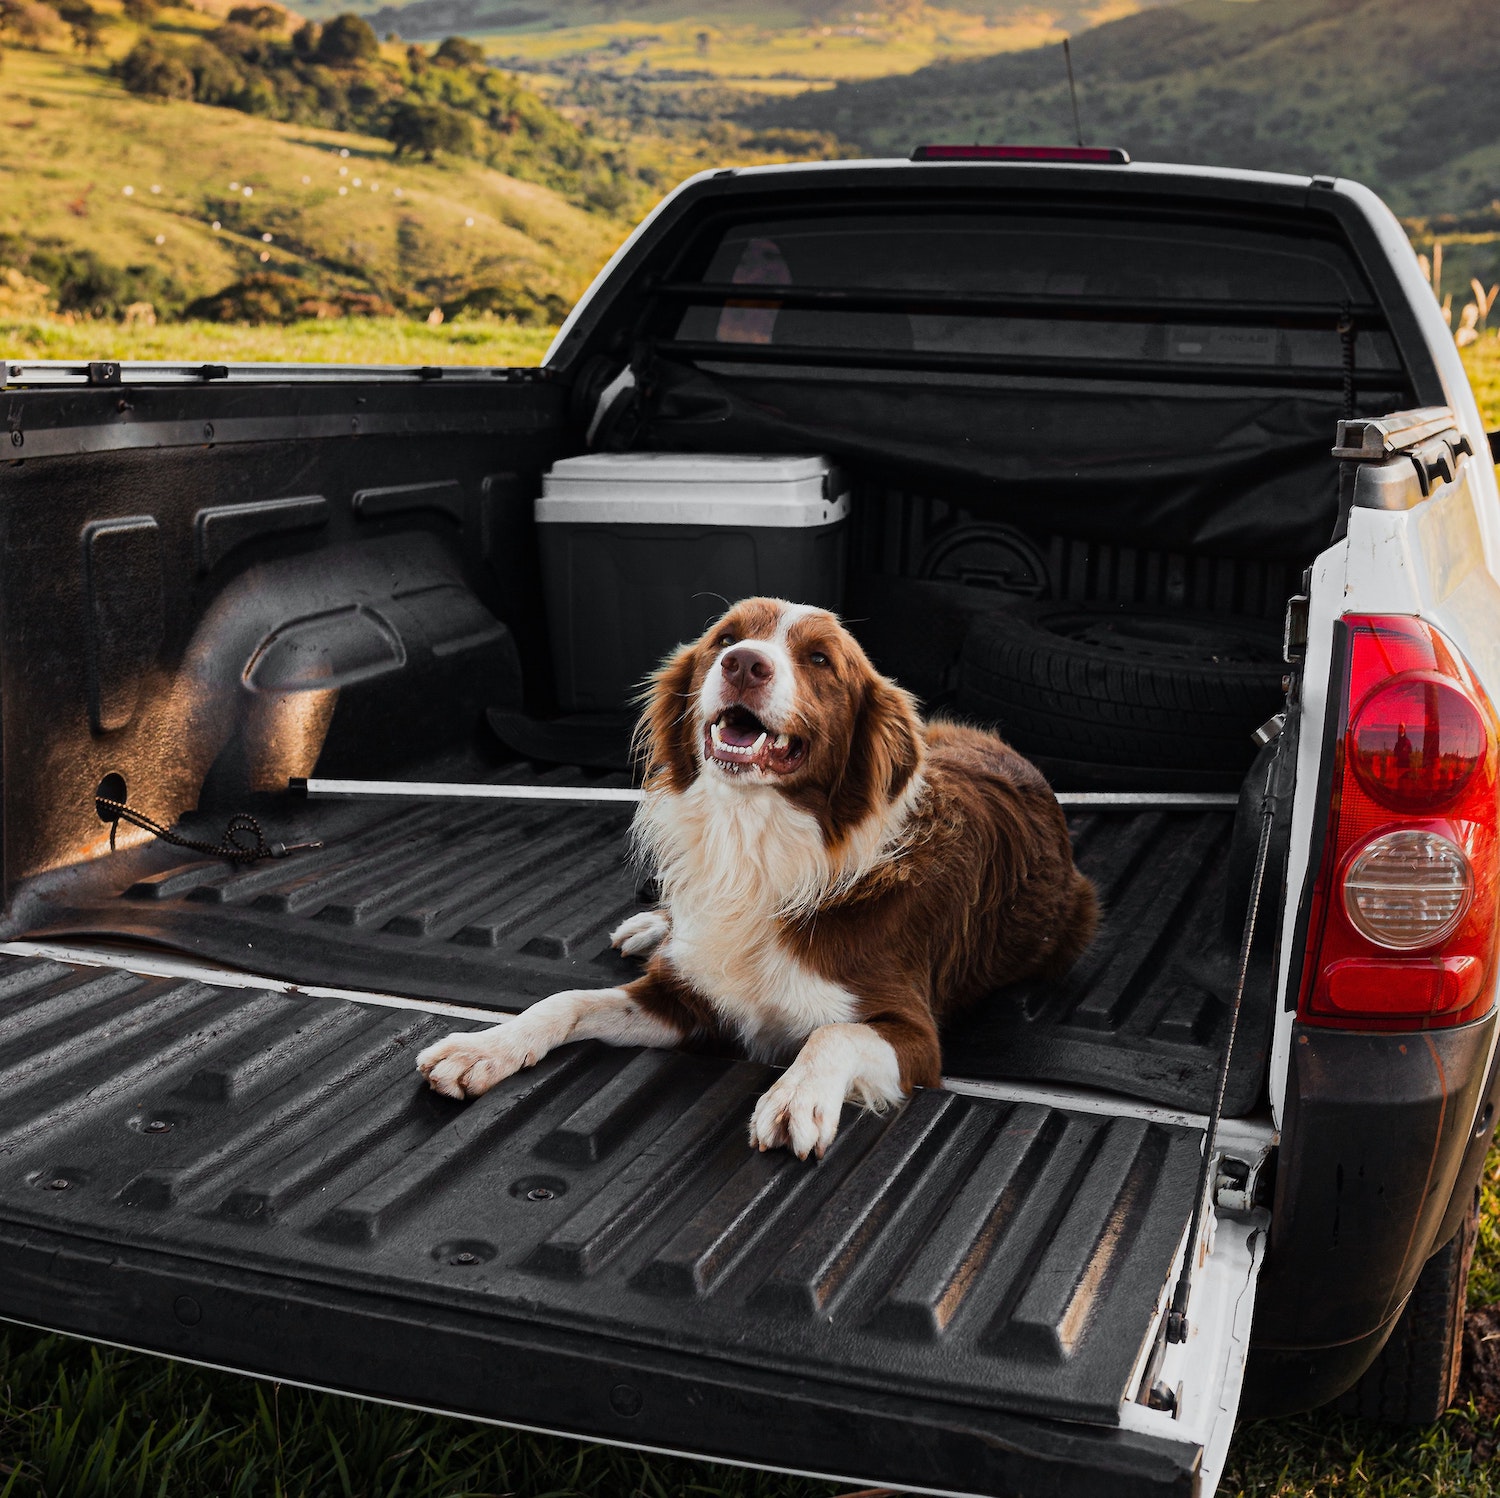 Dog in the bed of a compact pickup truck with mountains visible in the background.